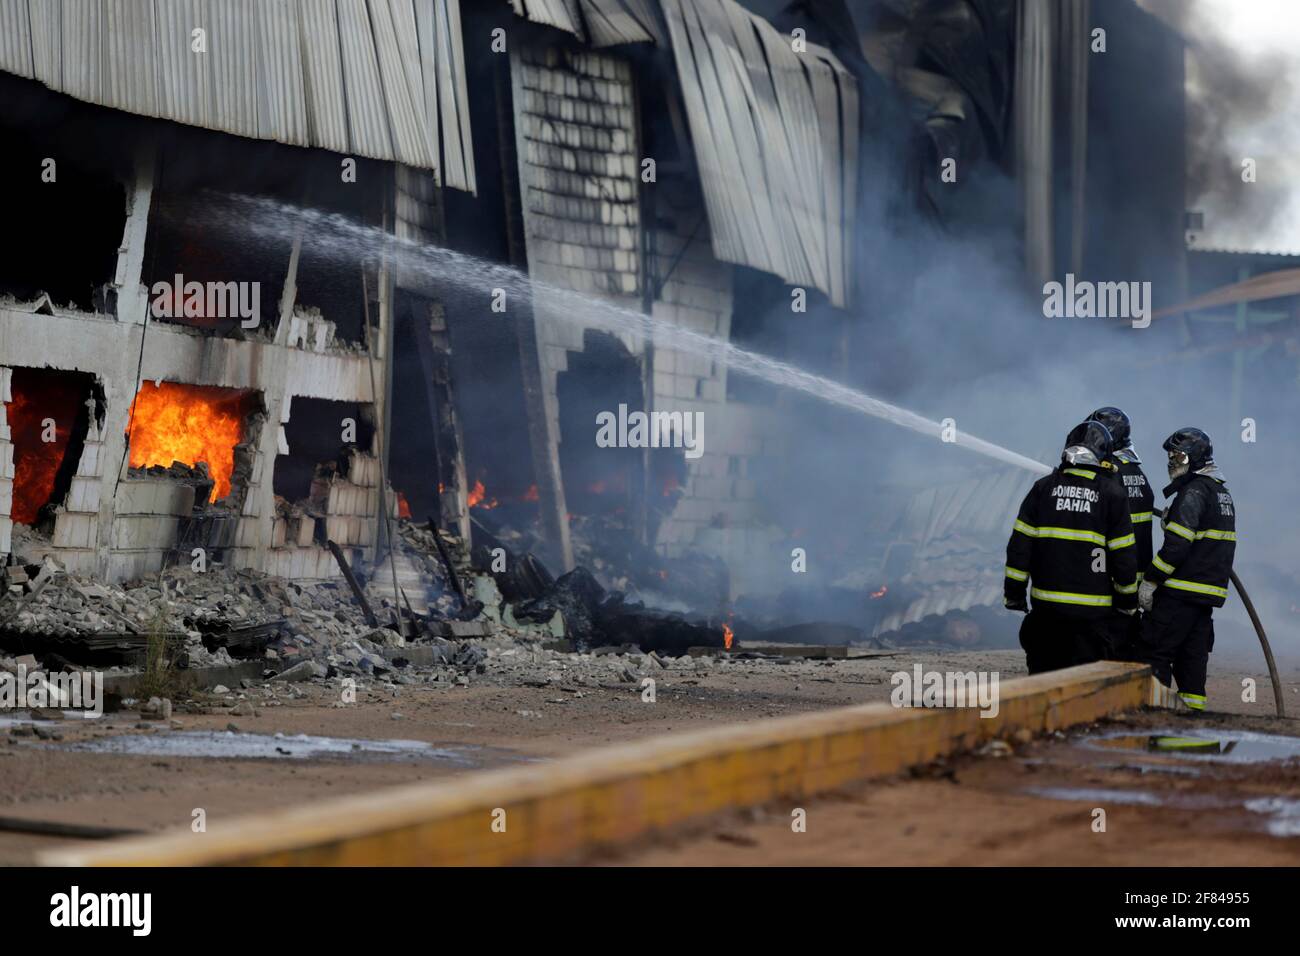 sao sebastiao do passe, bahia / brazil - may 31, 2019: Firefighters fire fighting at tire recycling factory in the city of Sao Sebastiao do Passe. *** Stock Photo